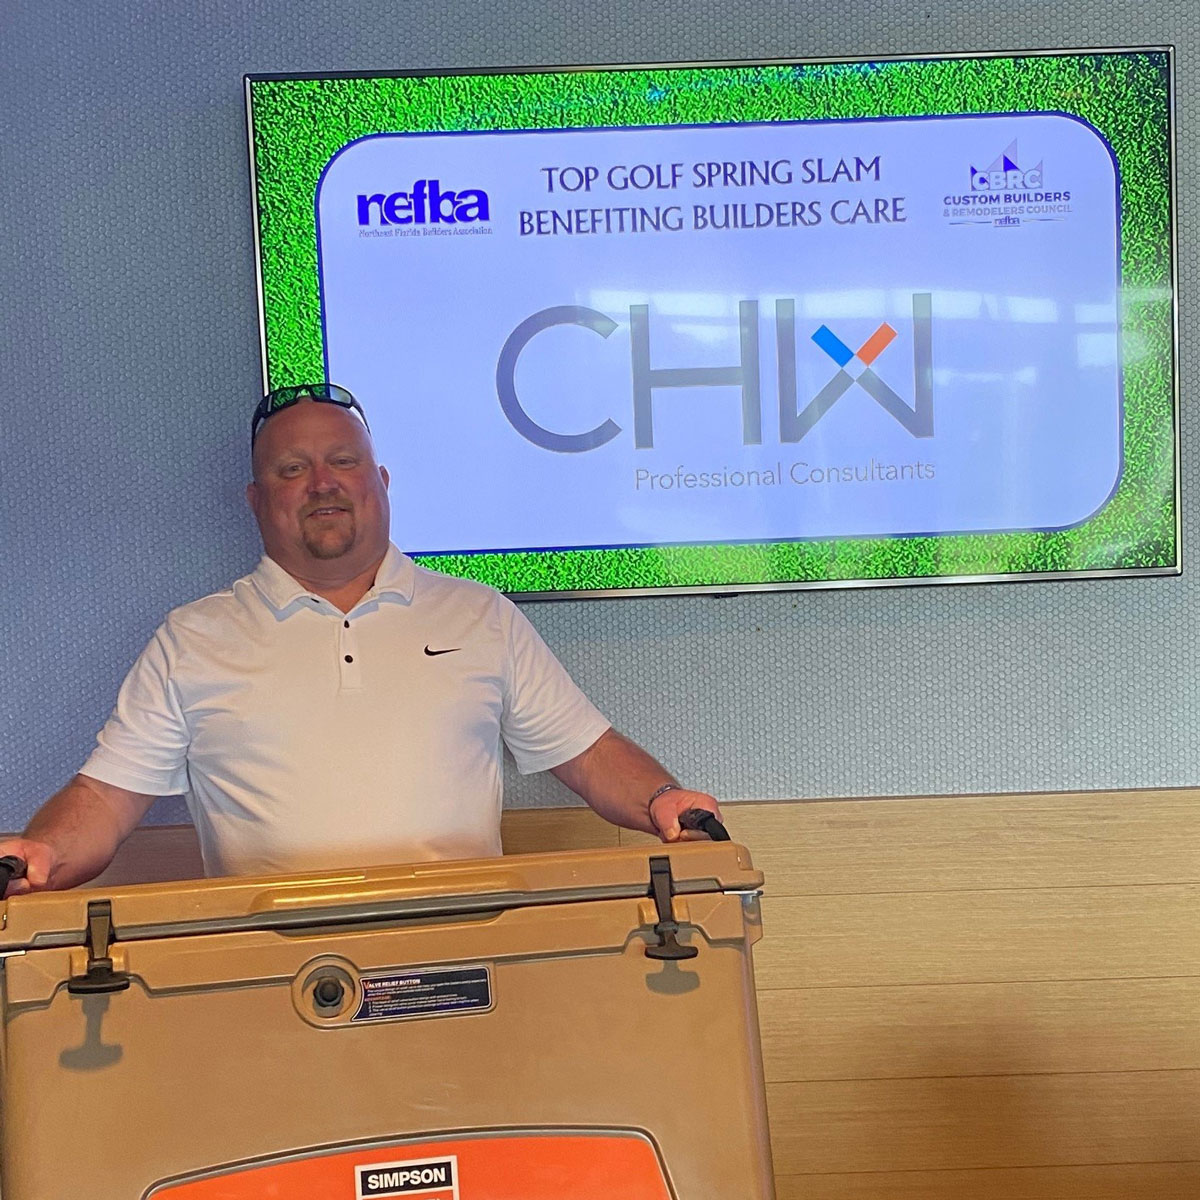 CHW Supports NEFBA Top Golf Spring Slam as Silver Sponsor